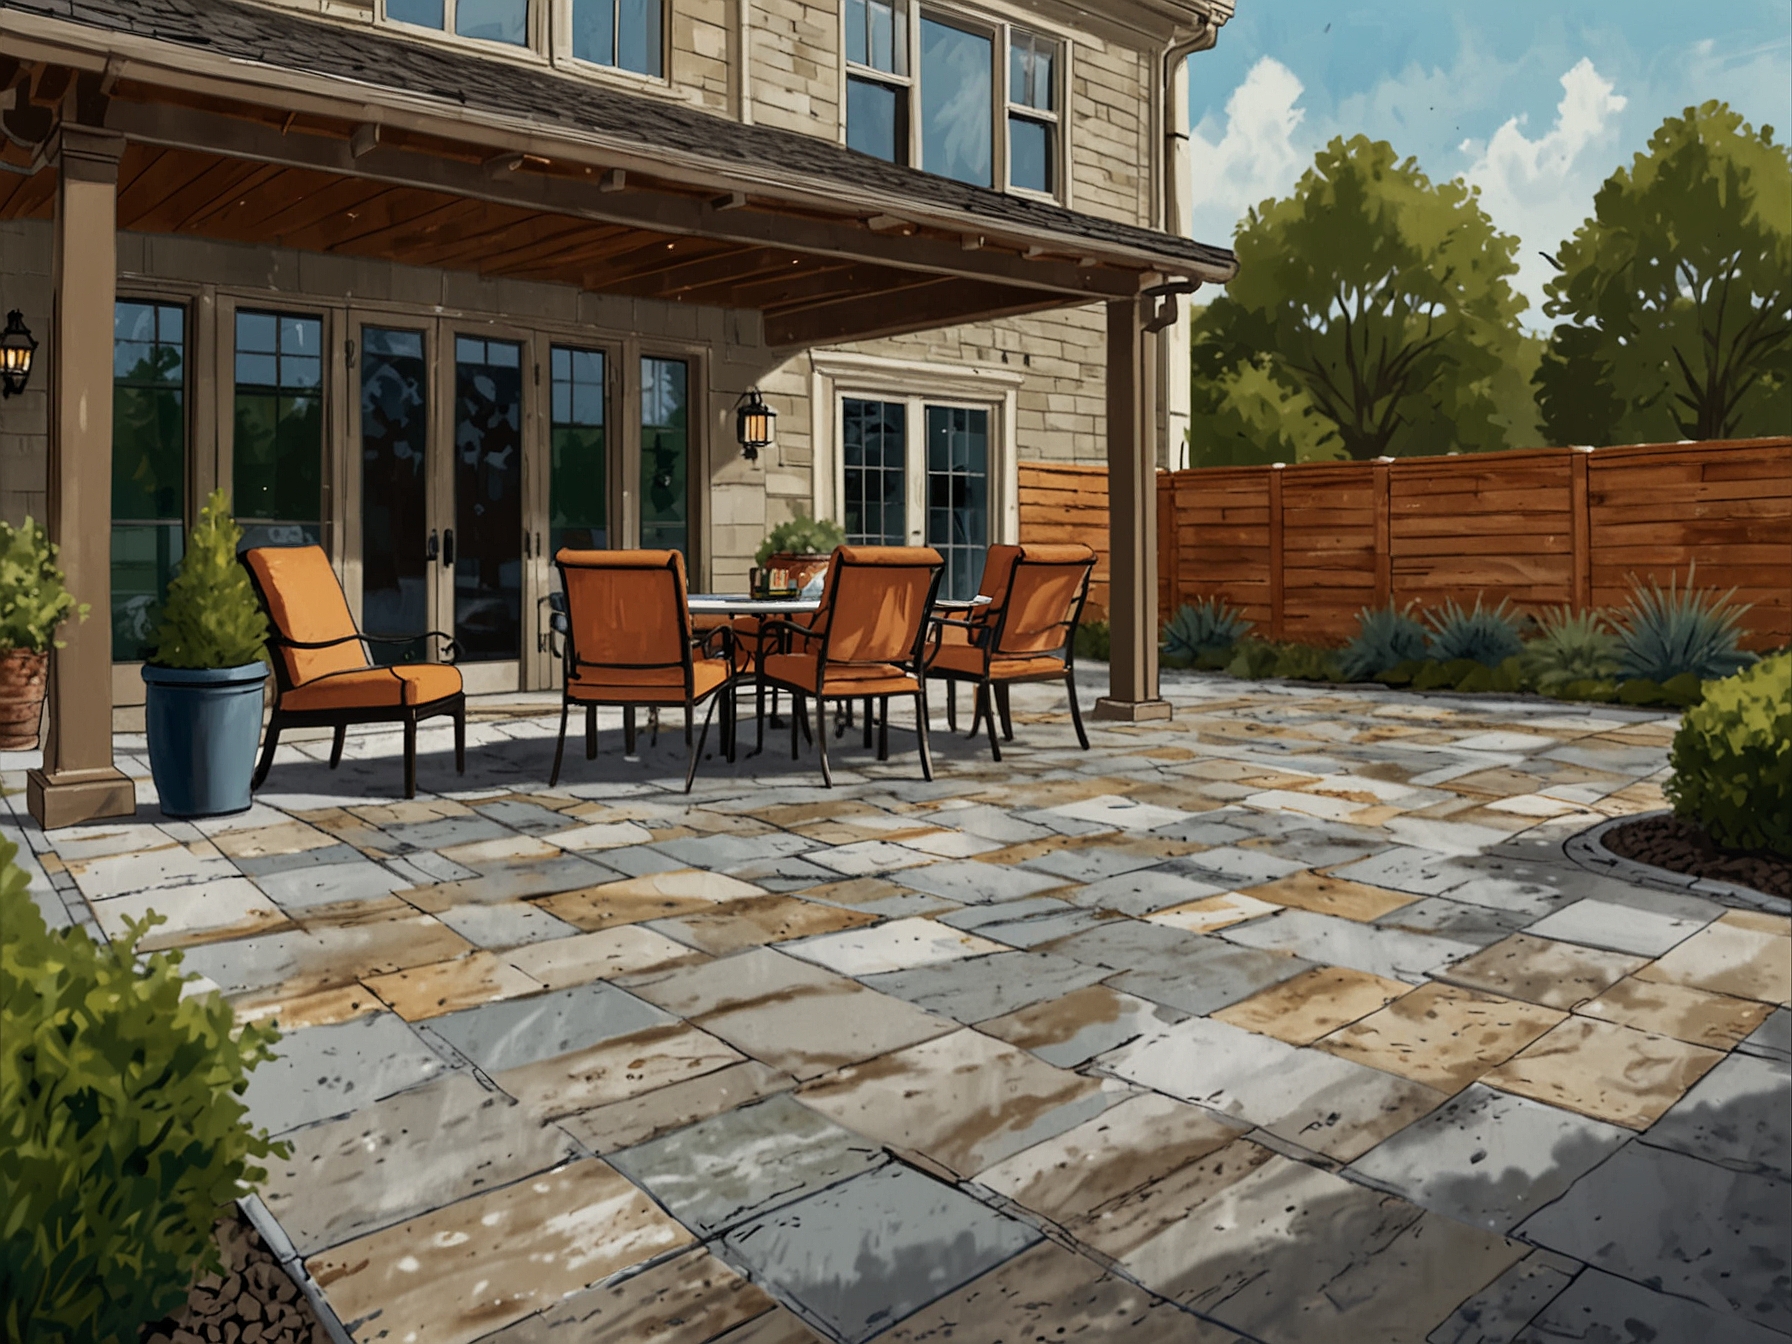 An illustration of a well-maintained patio with properly installed pavers and a solid base, showcasing a professional installation that prevents cracks and withstands seasonal changes.